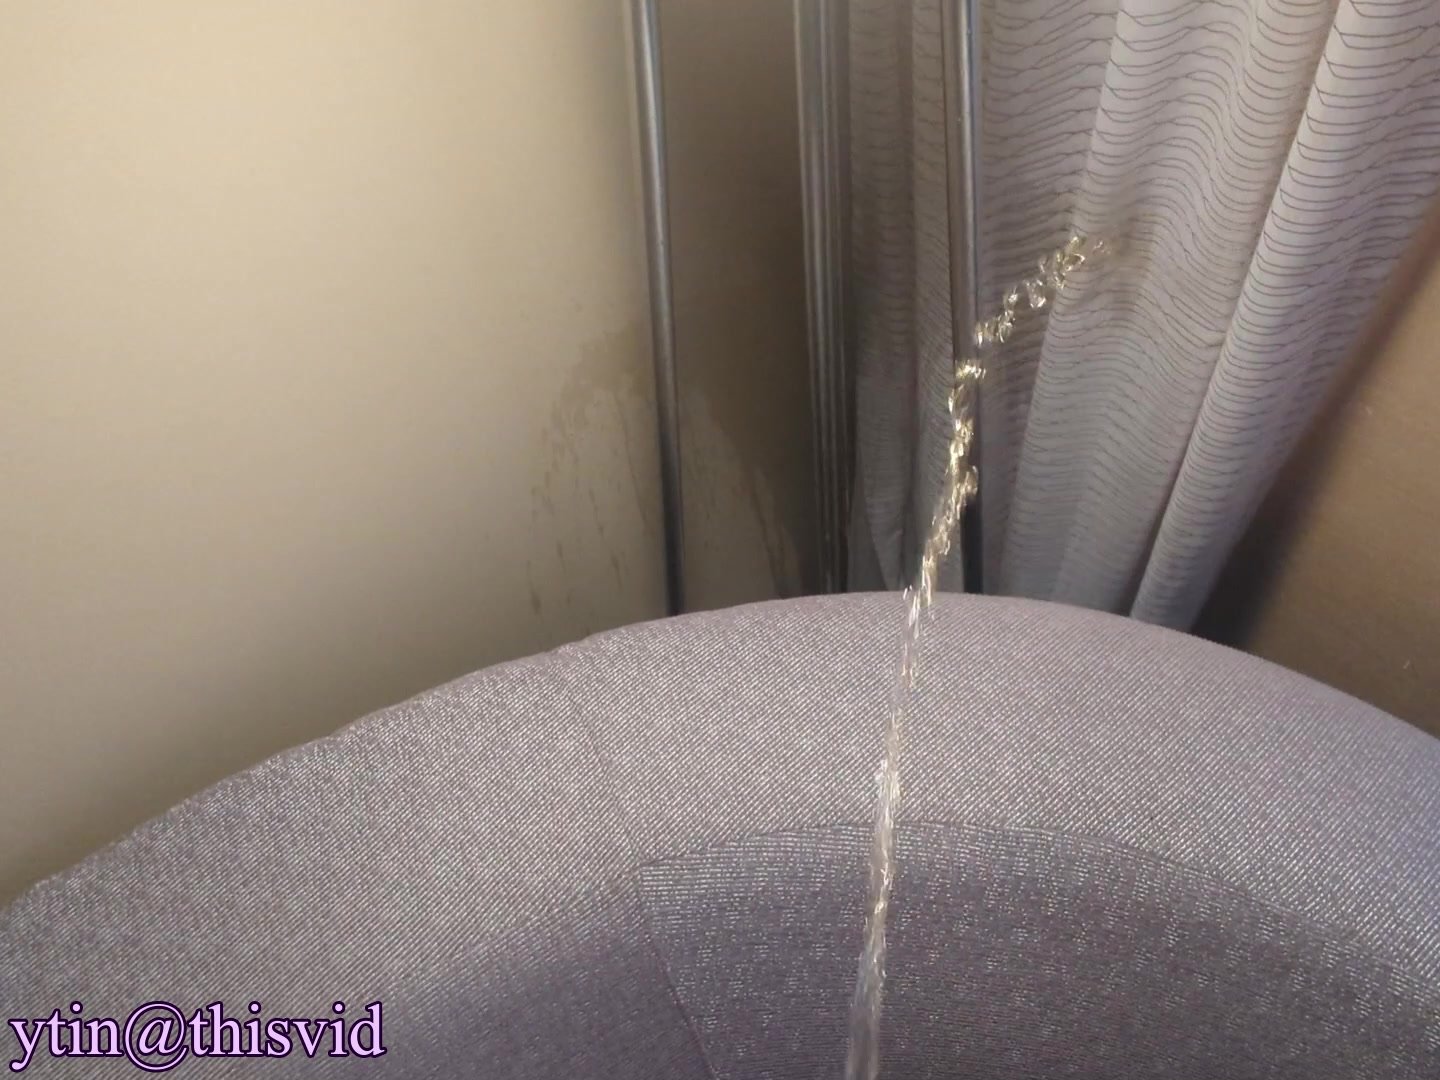 Hotel Piss Behind Couch on Lamp and Curtains